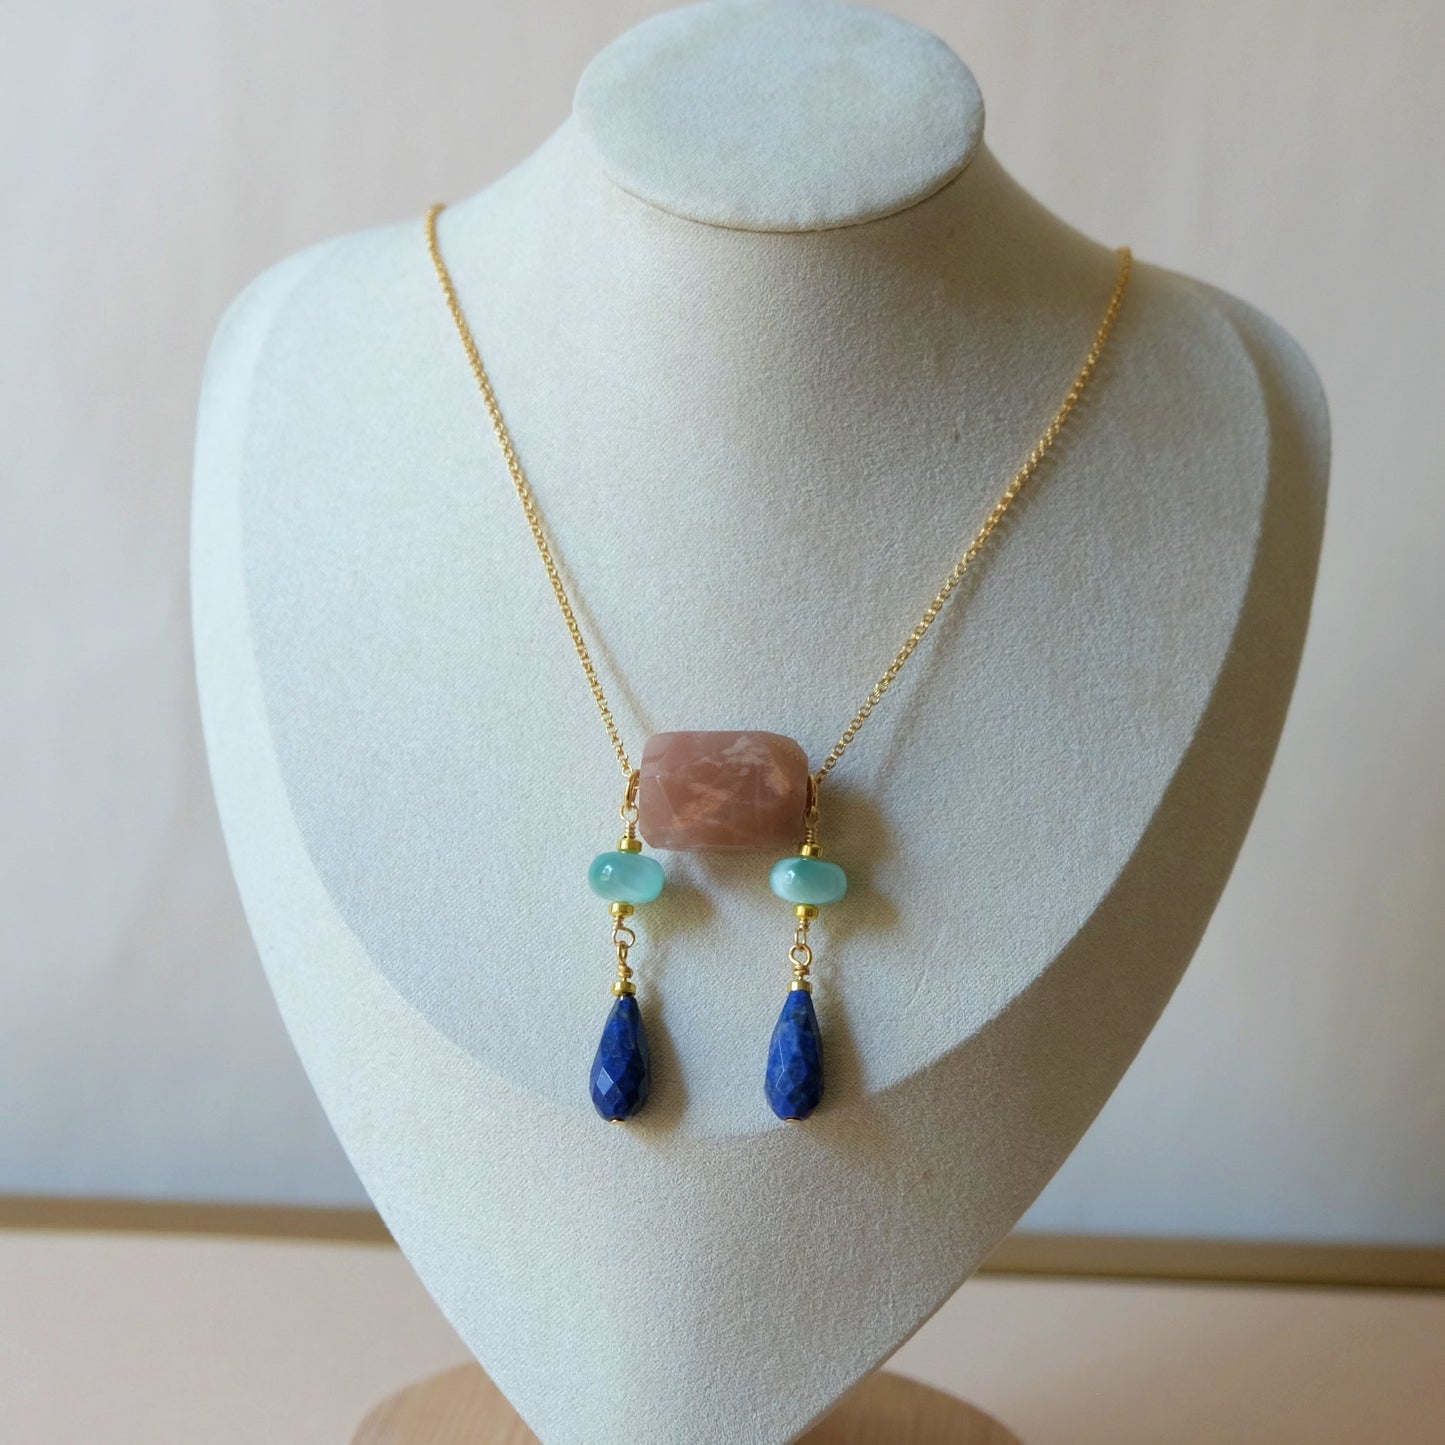 Abstract Necklace with Lapis Lazuli and Moonstone